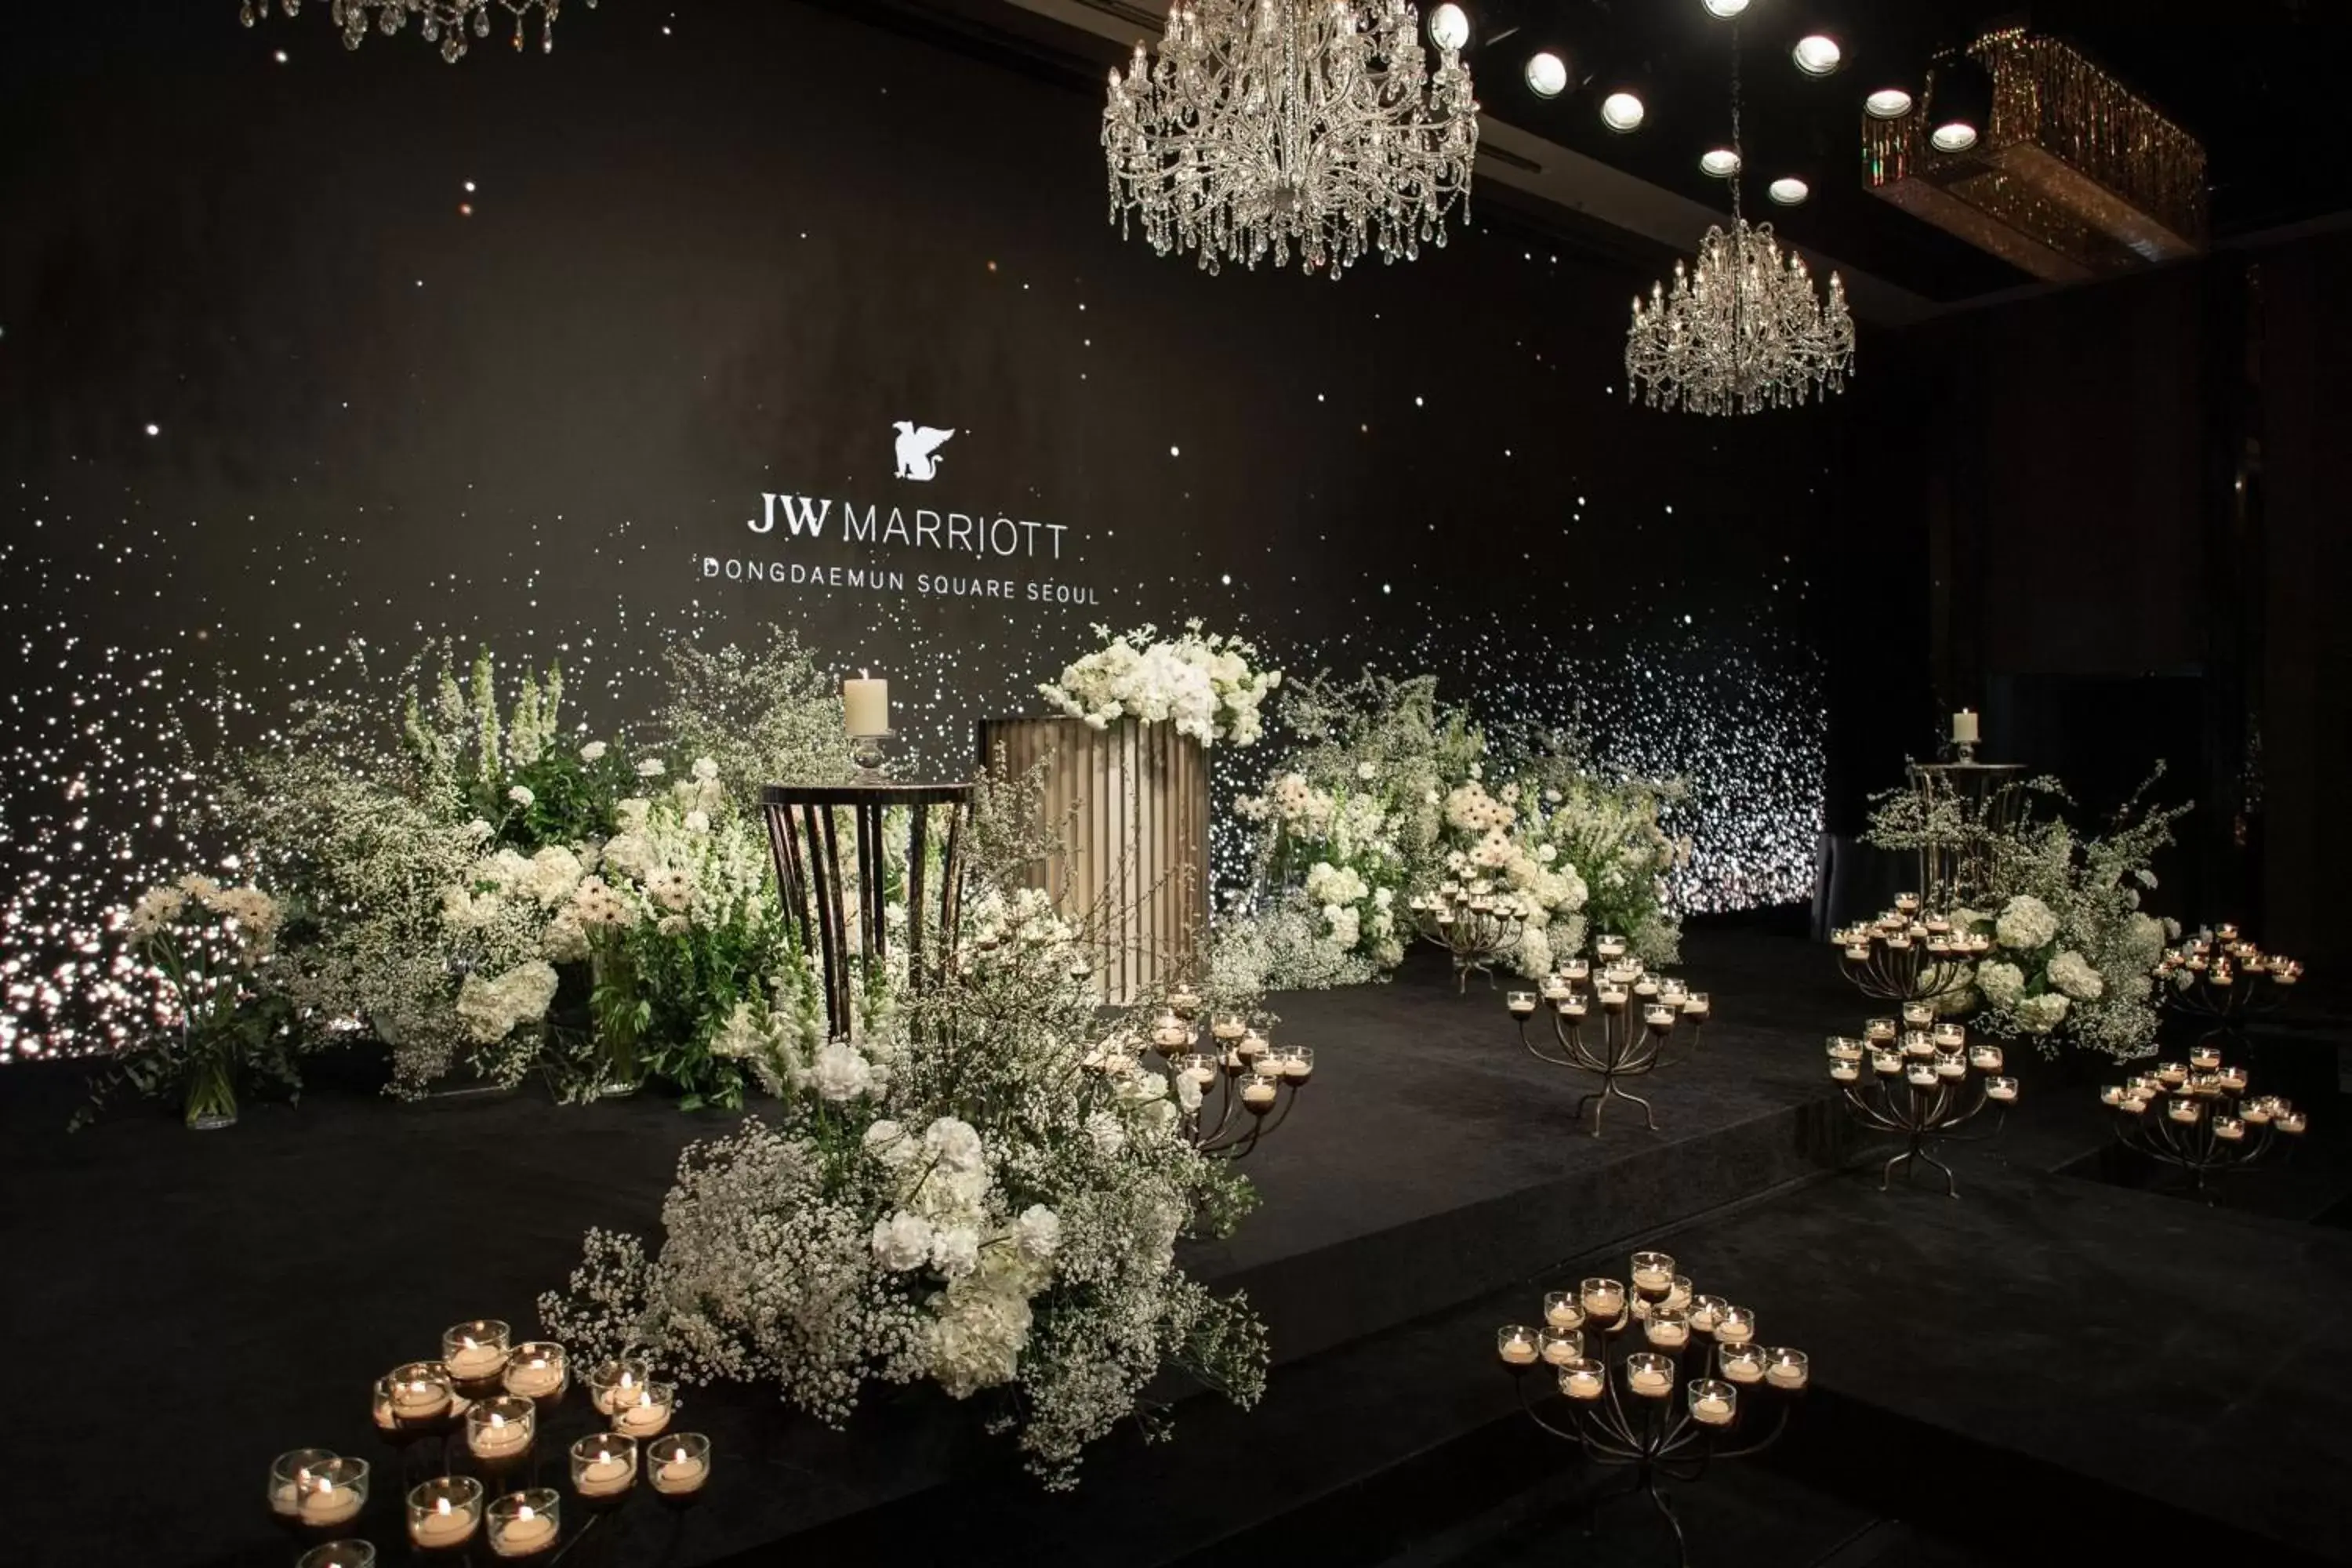 Banquet/Function facilities, Garden in JW Marriott Dongdaemun Square Seoul